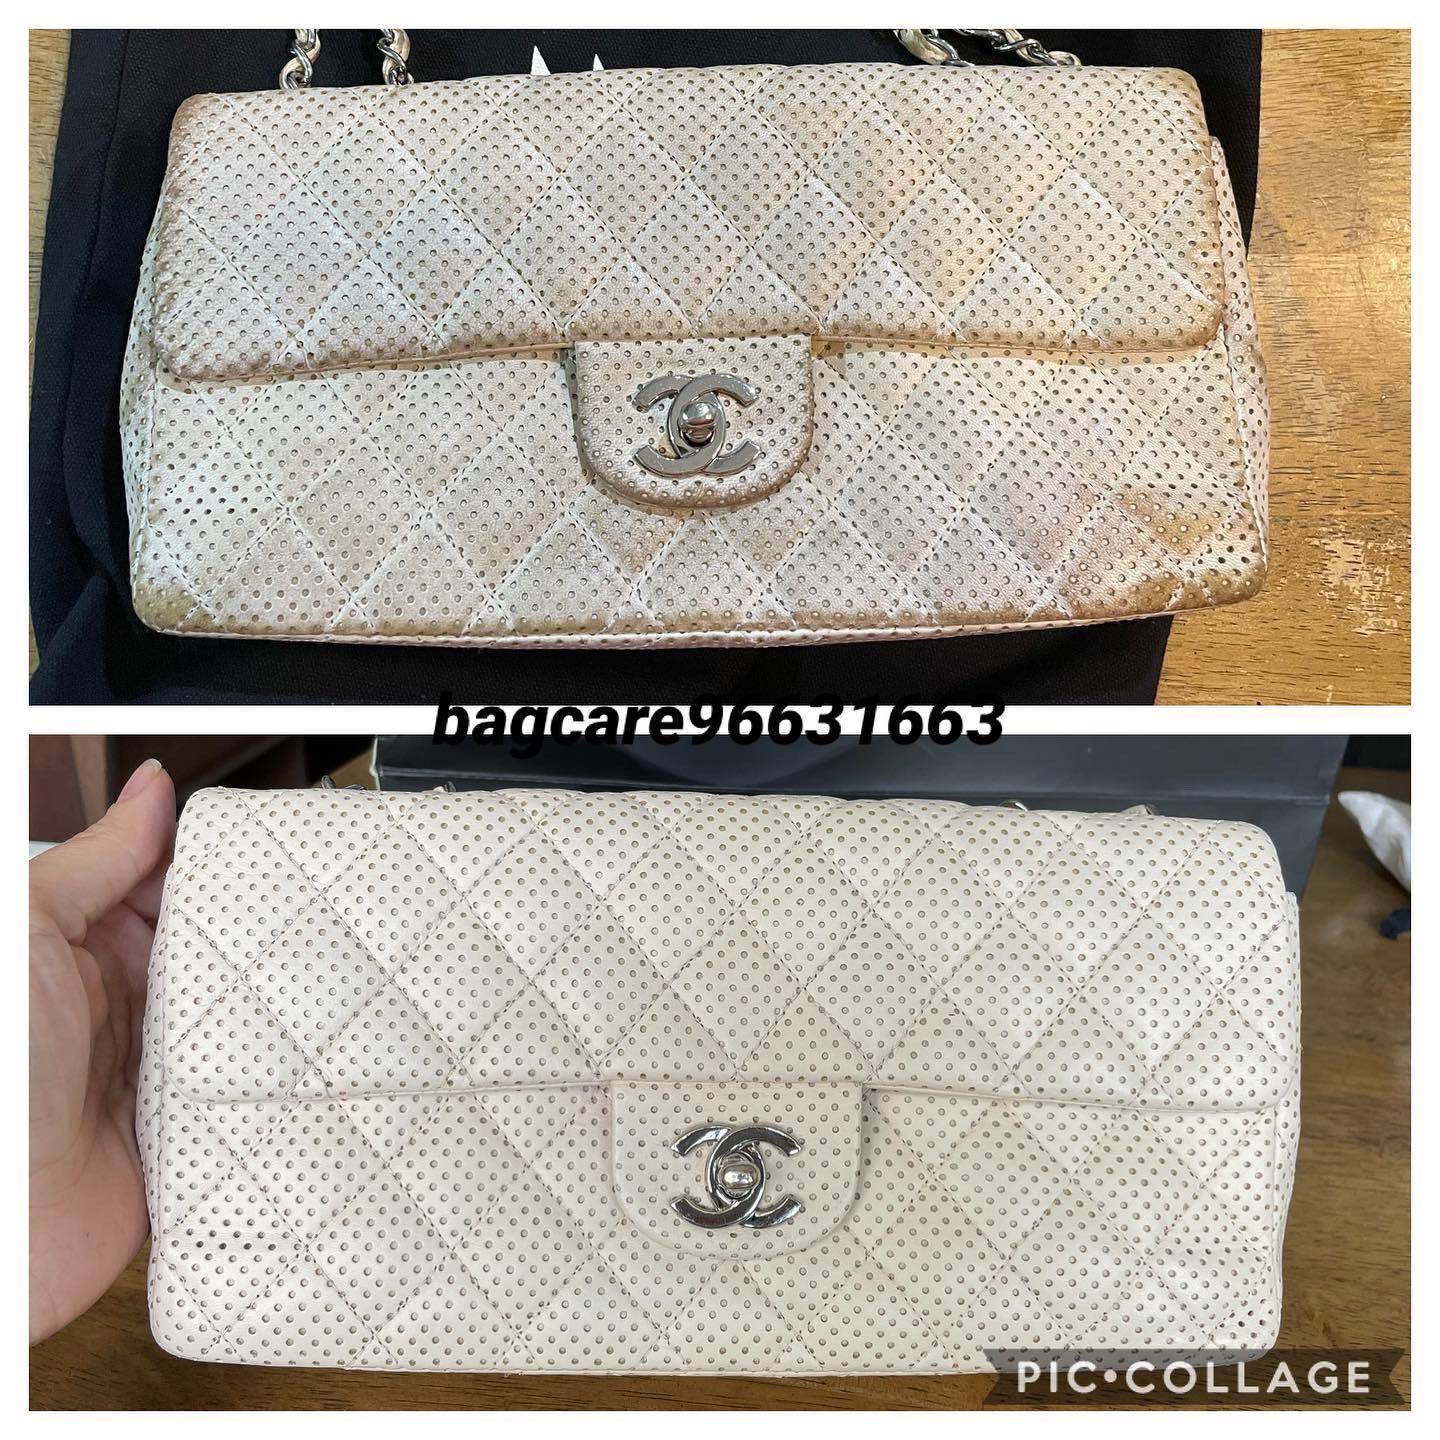 Bag spa 24k gold replating,bag recolouring,leather repair,bag  cleaning,restoration , Lifestyle Services, Tailoring & Restoration on  Carousell